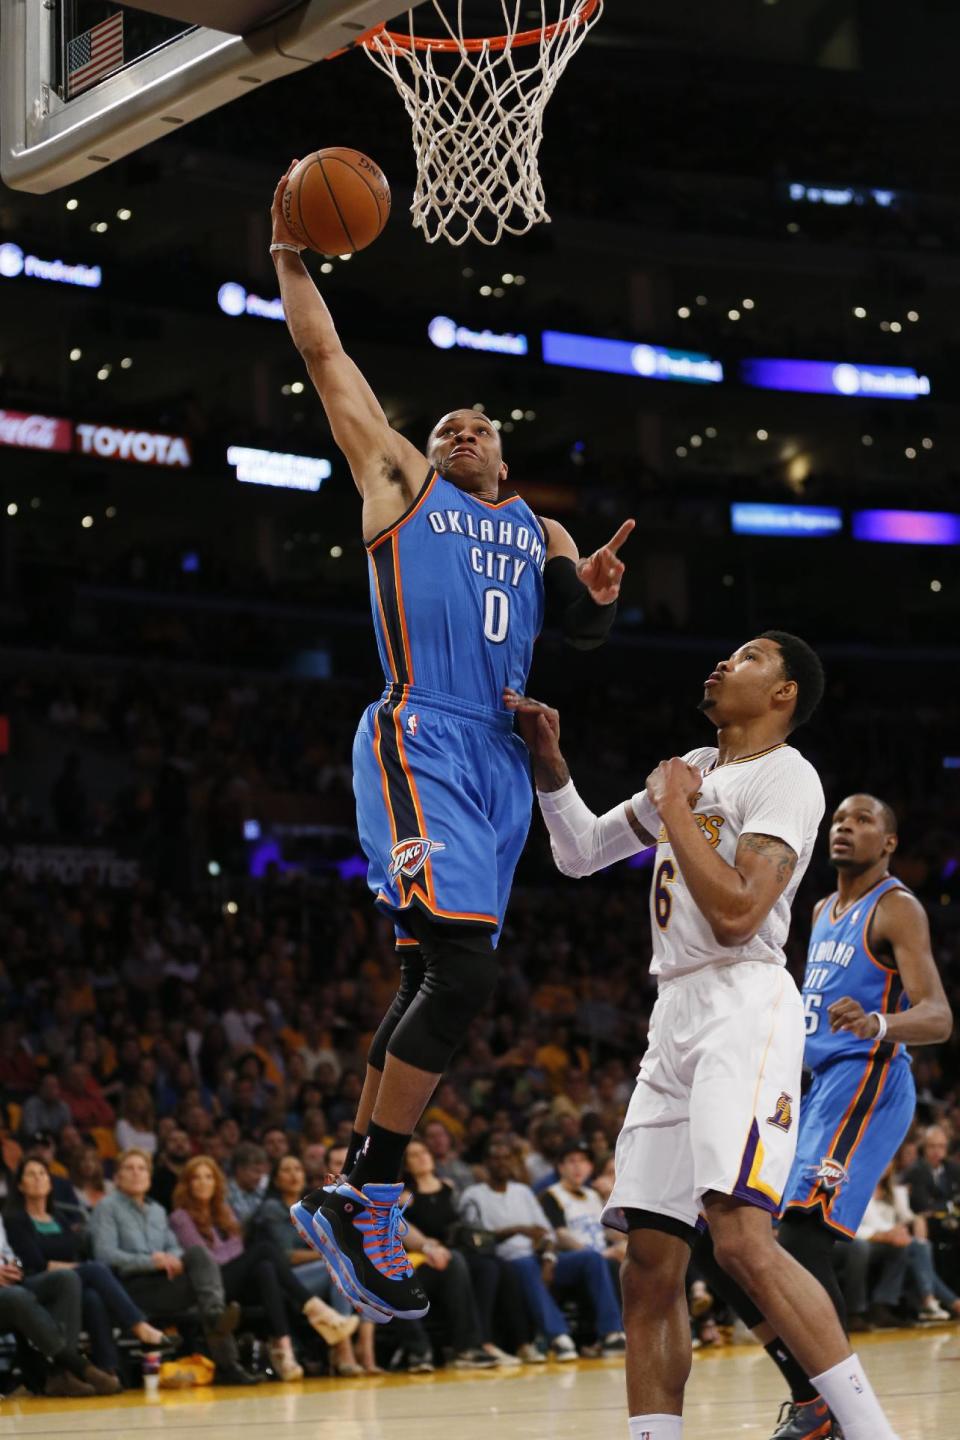 Oklahoma City Thunder point guard Russell Westbrook, left, goes to the hoop over Los Angeles Lakers shooting guard Kent Bazemore during the first half of an NBA basketball game in Los Angeles, Sunday, March 9, 2014. (AP Photo/Danny Moloshok)